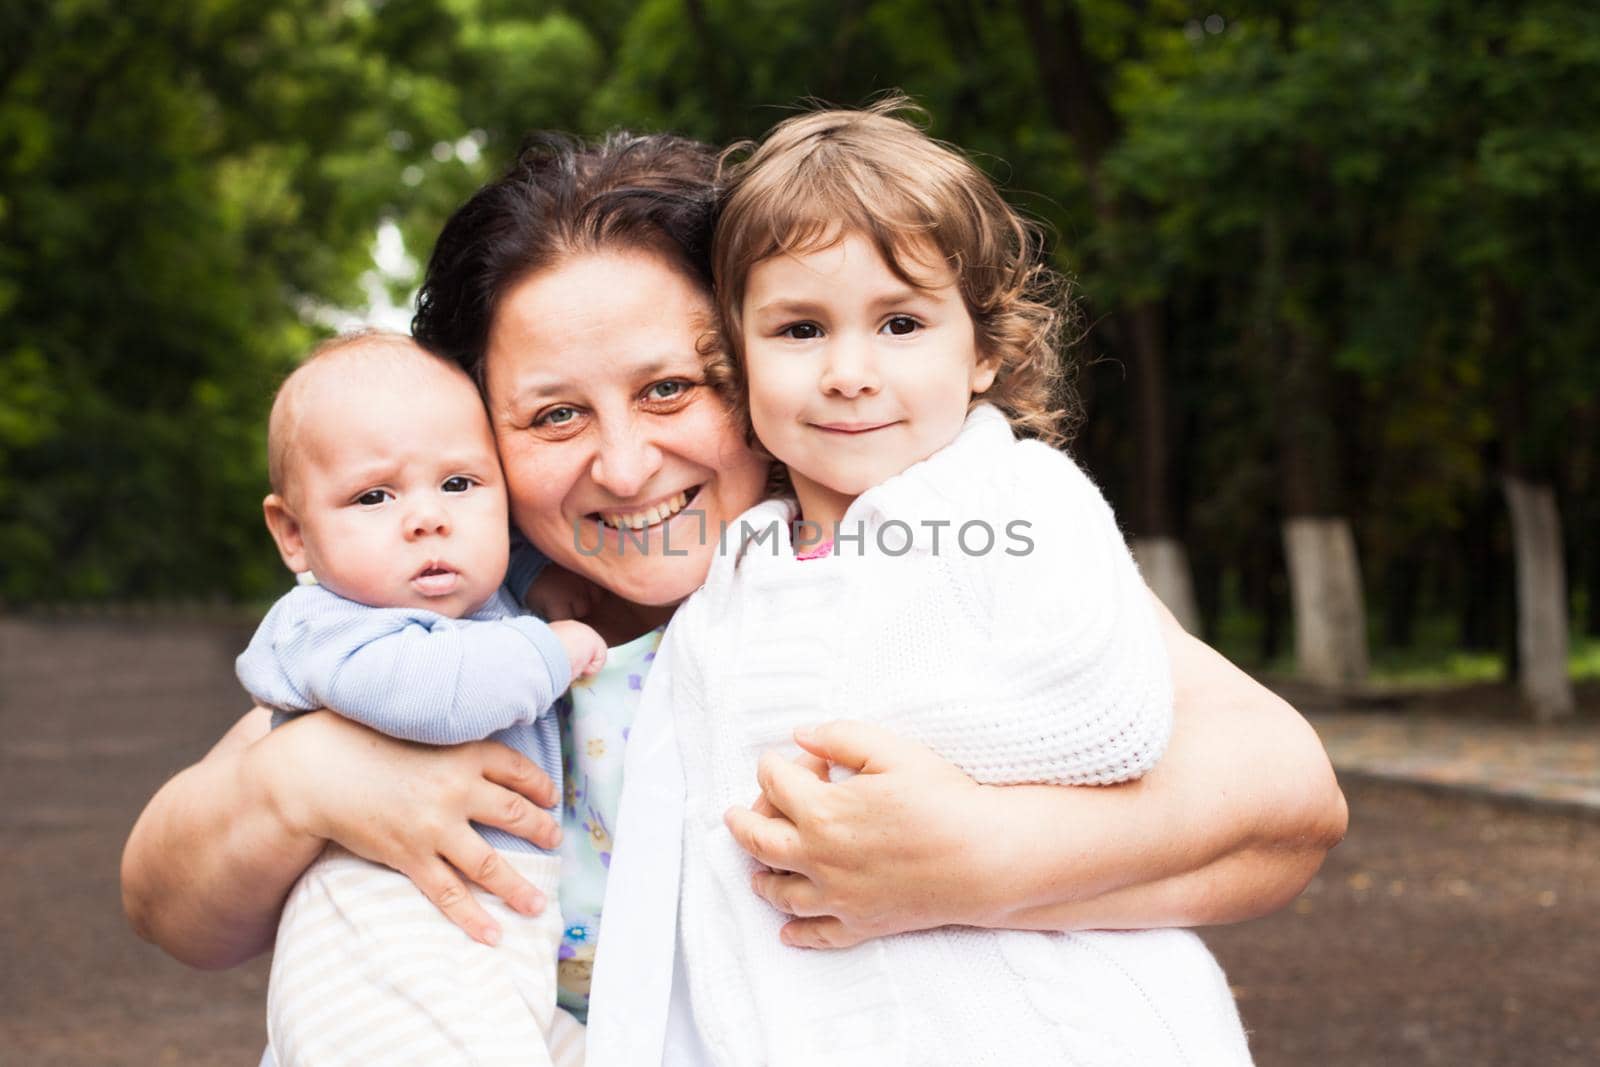 Grandmother with her grandchildren in a park. Family portraits